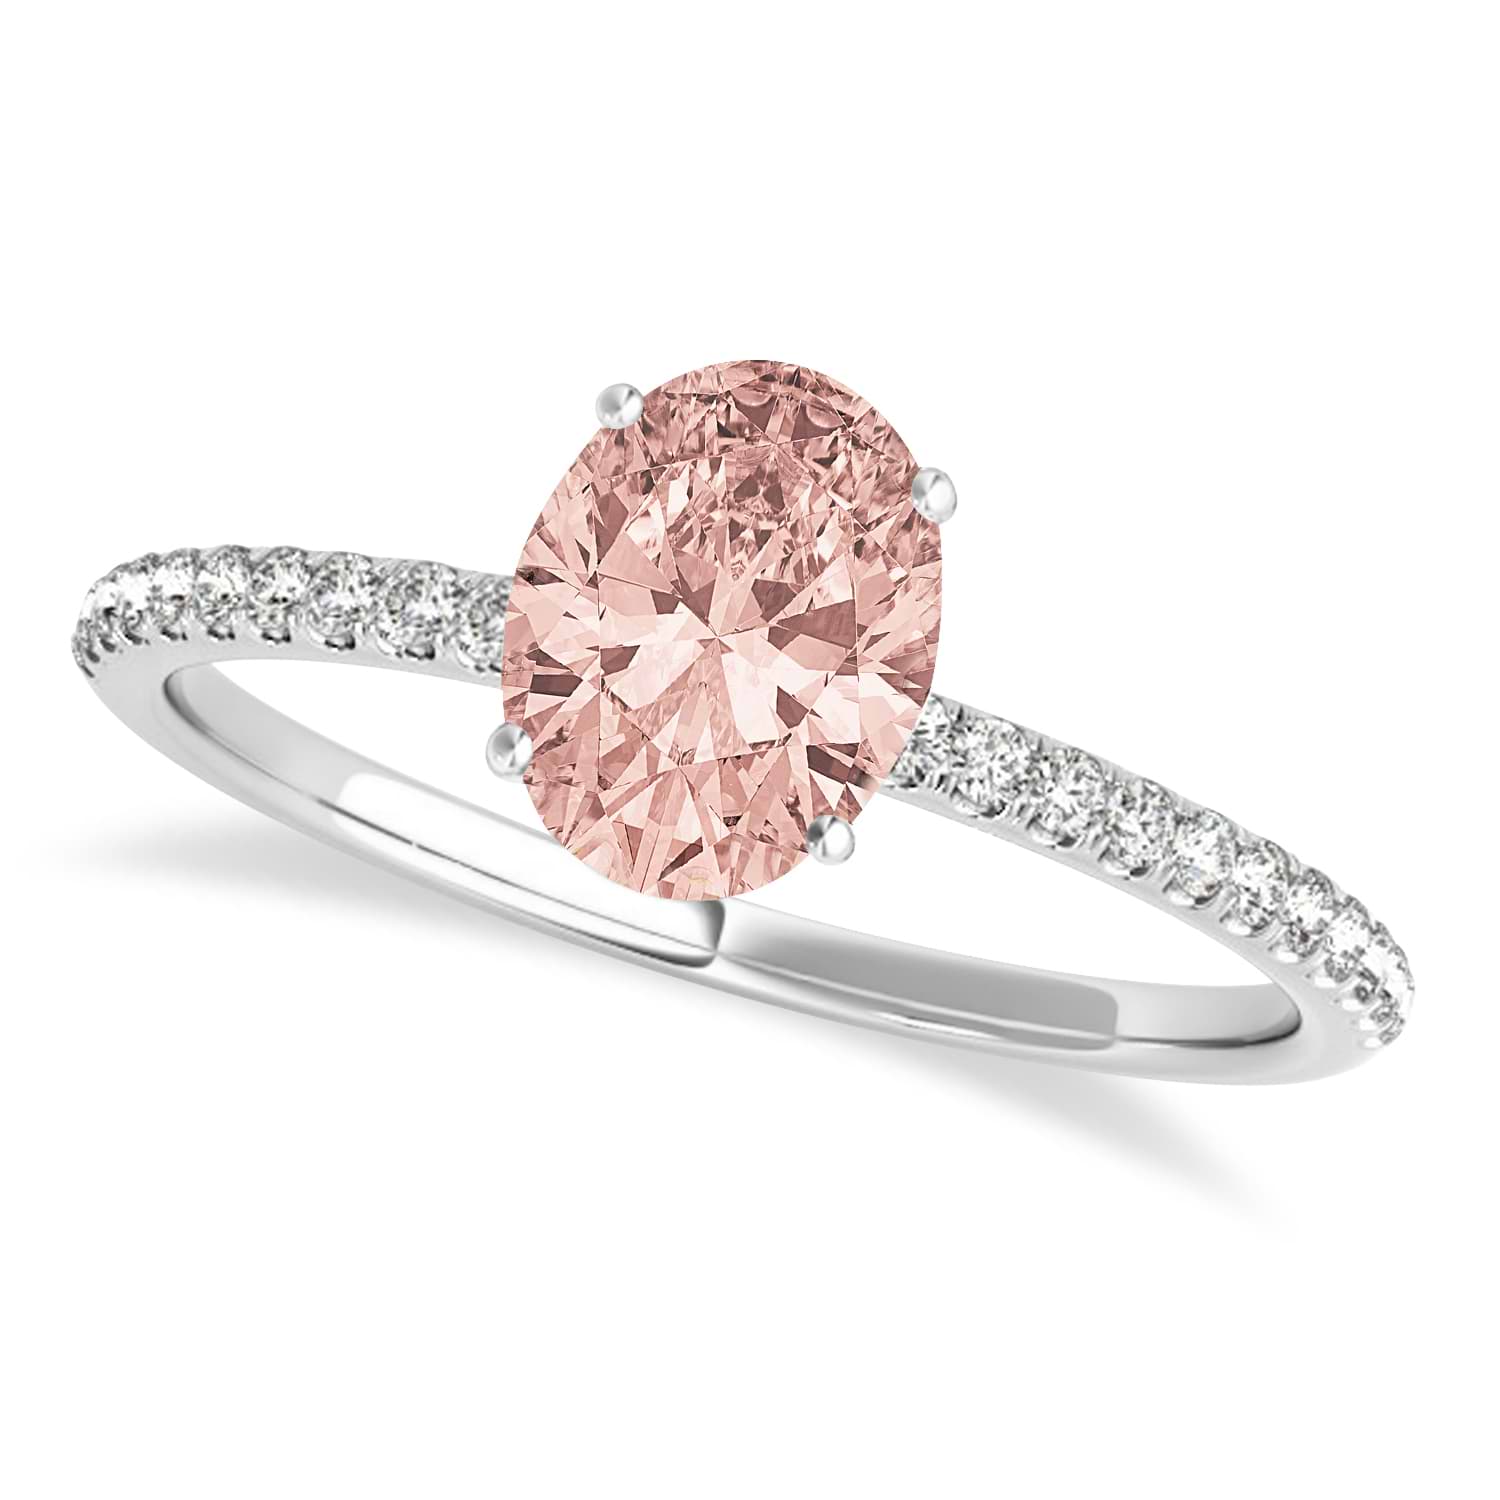 Morganite & Diamond Accented Oval Shape Engagement Ring 14k White Gold (1.00ct)